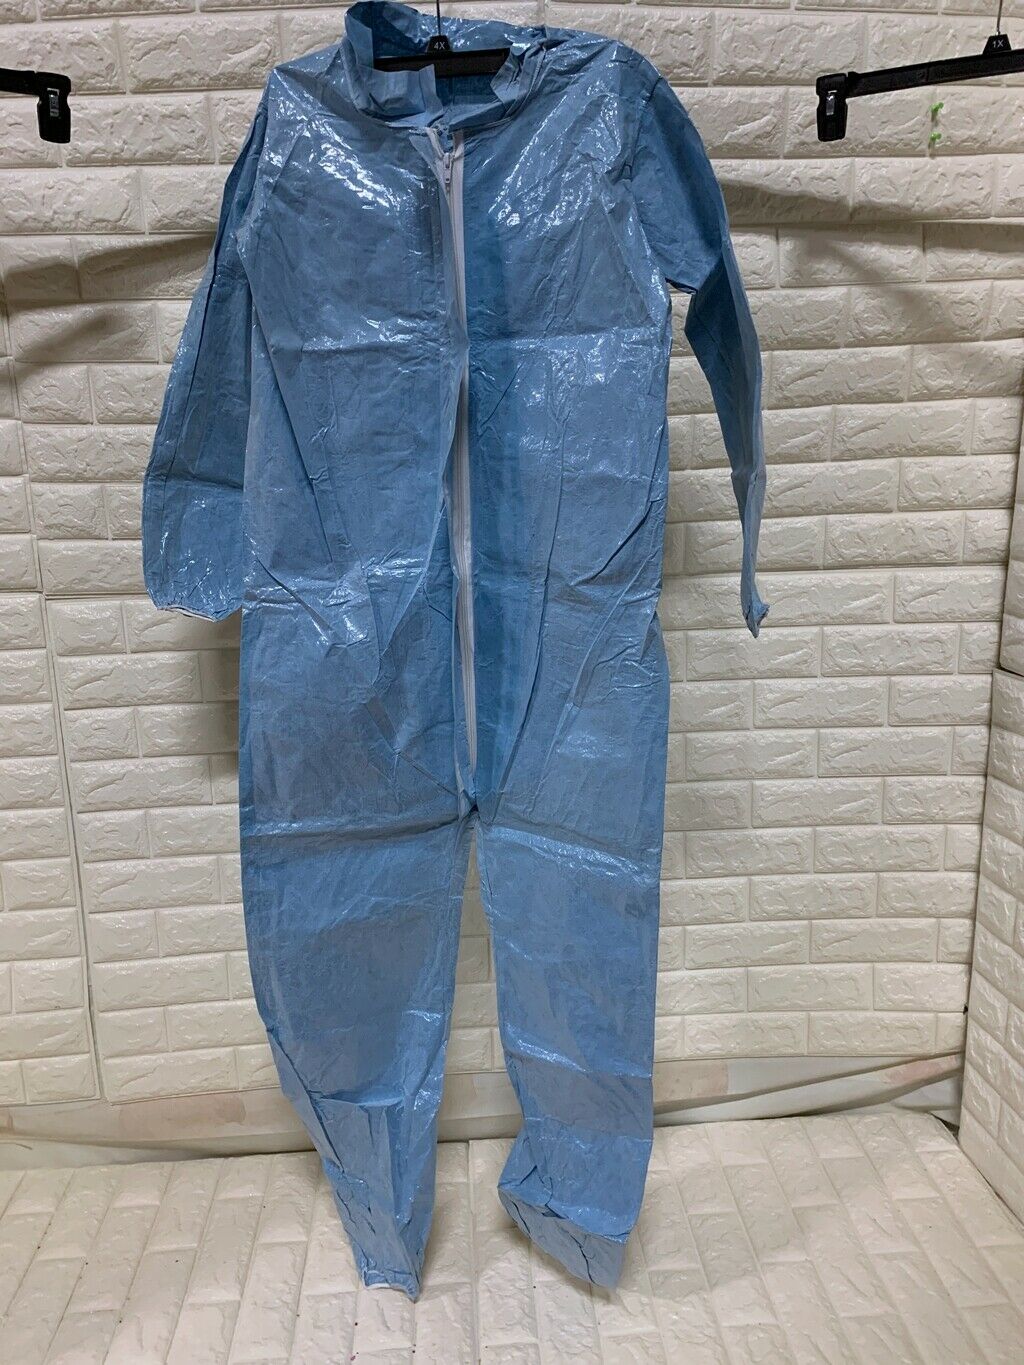 Lakeland Protective Coverall Suit  37417 Elas Wr Ank Stm Flap Crfr Material